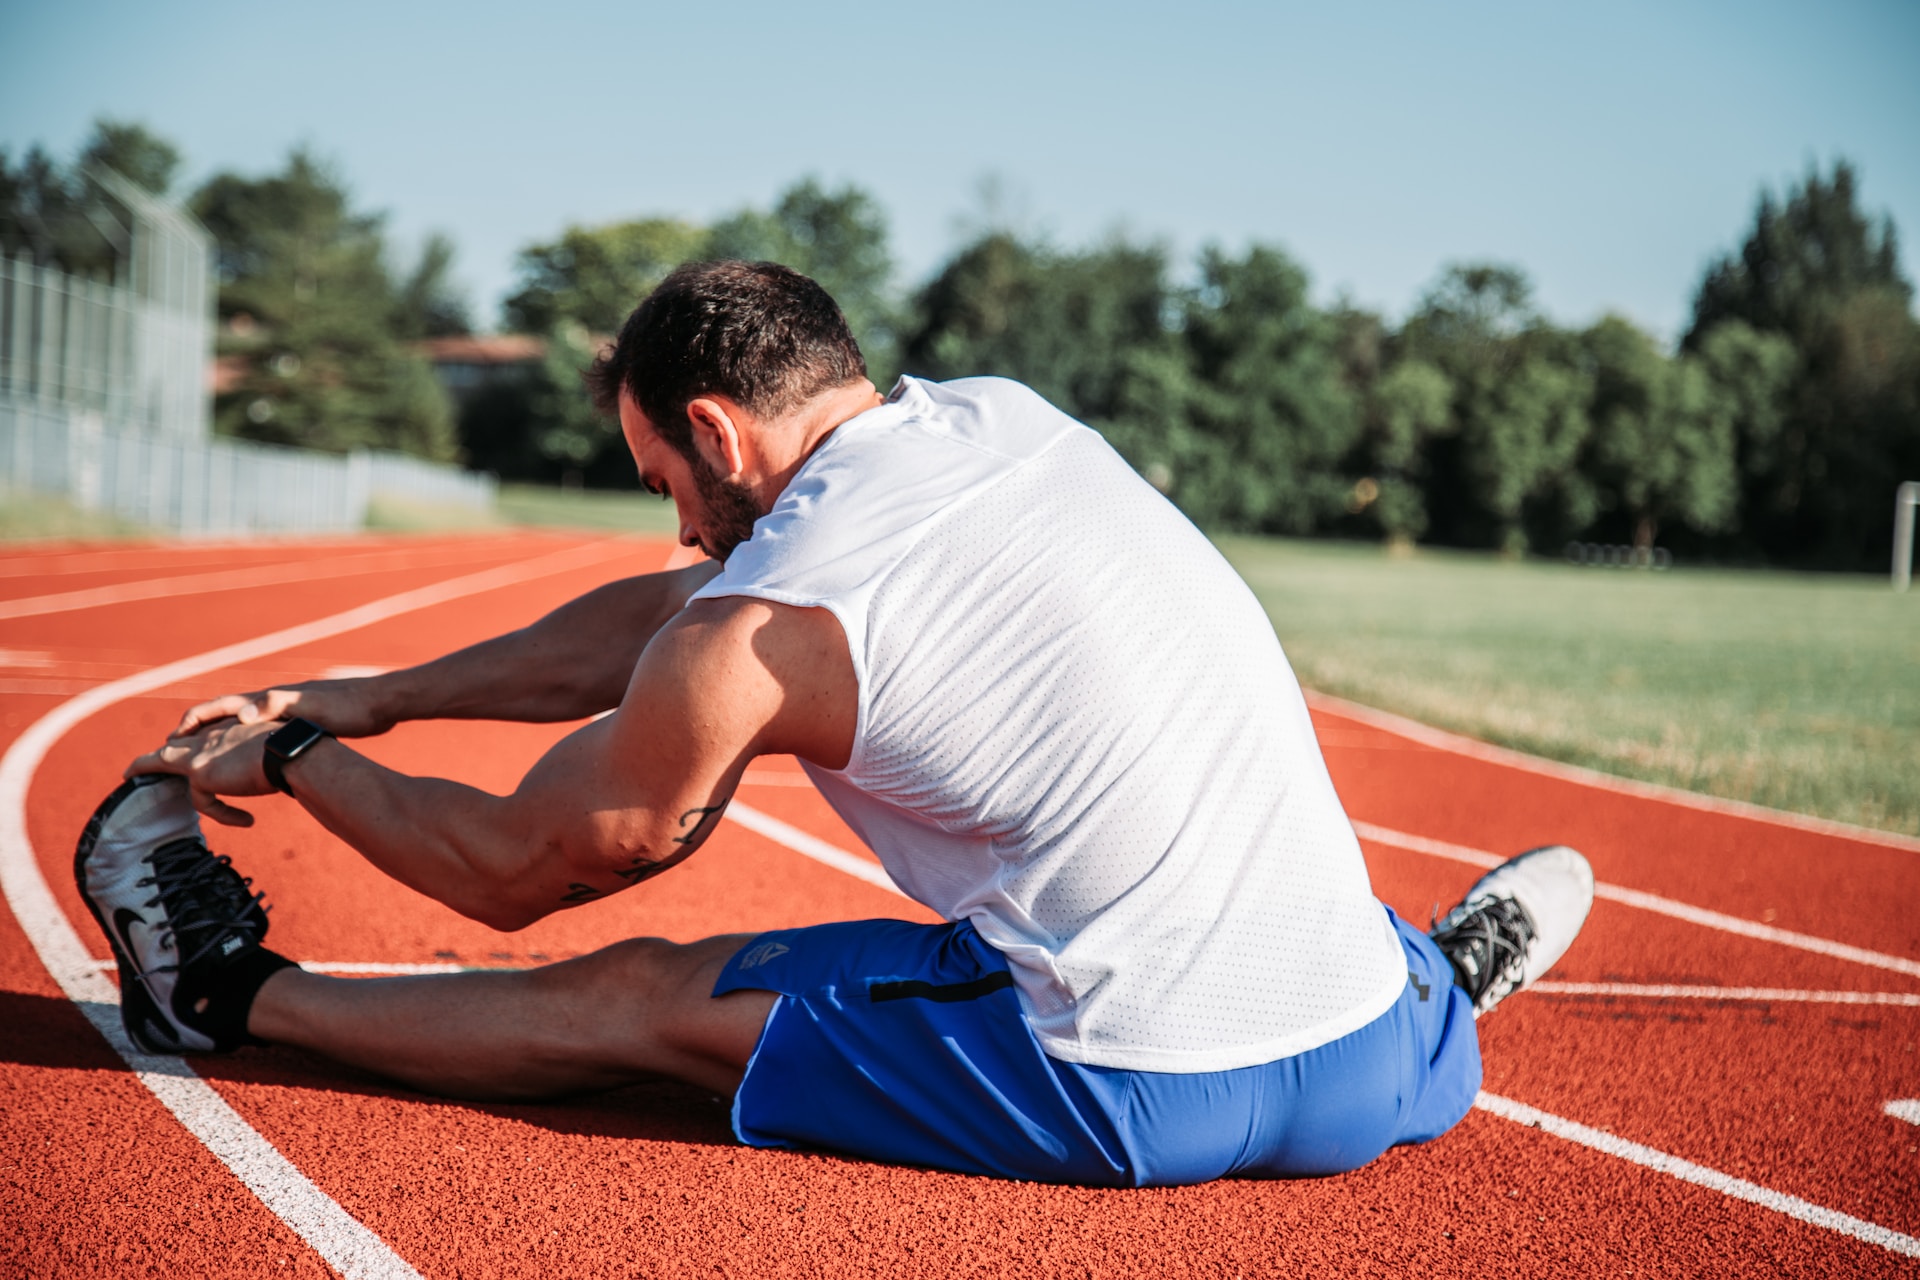 the image shows a male athlete doing stretching